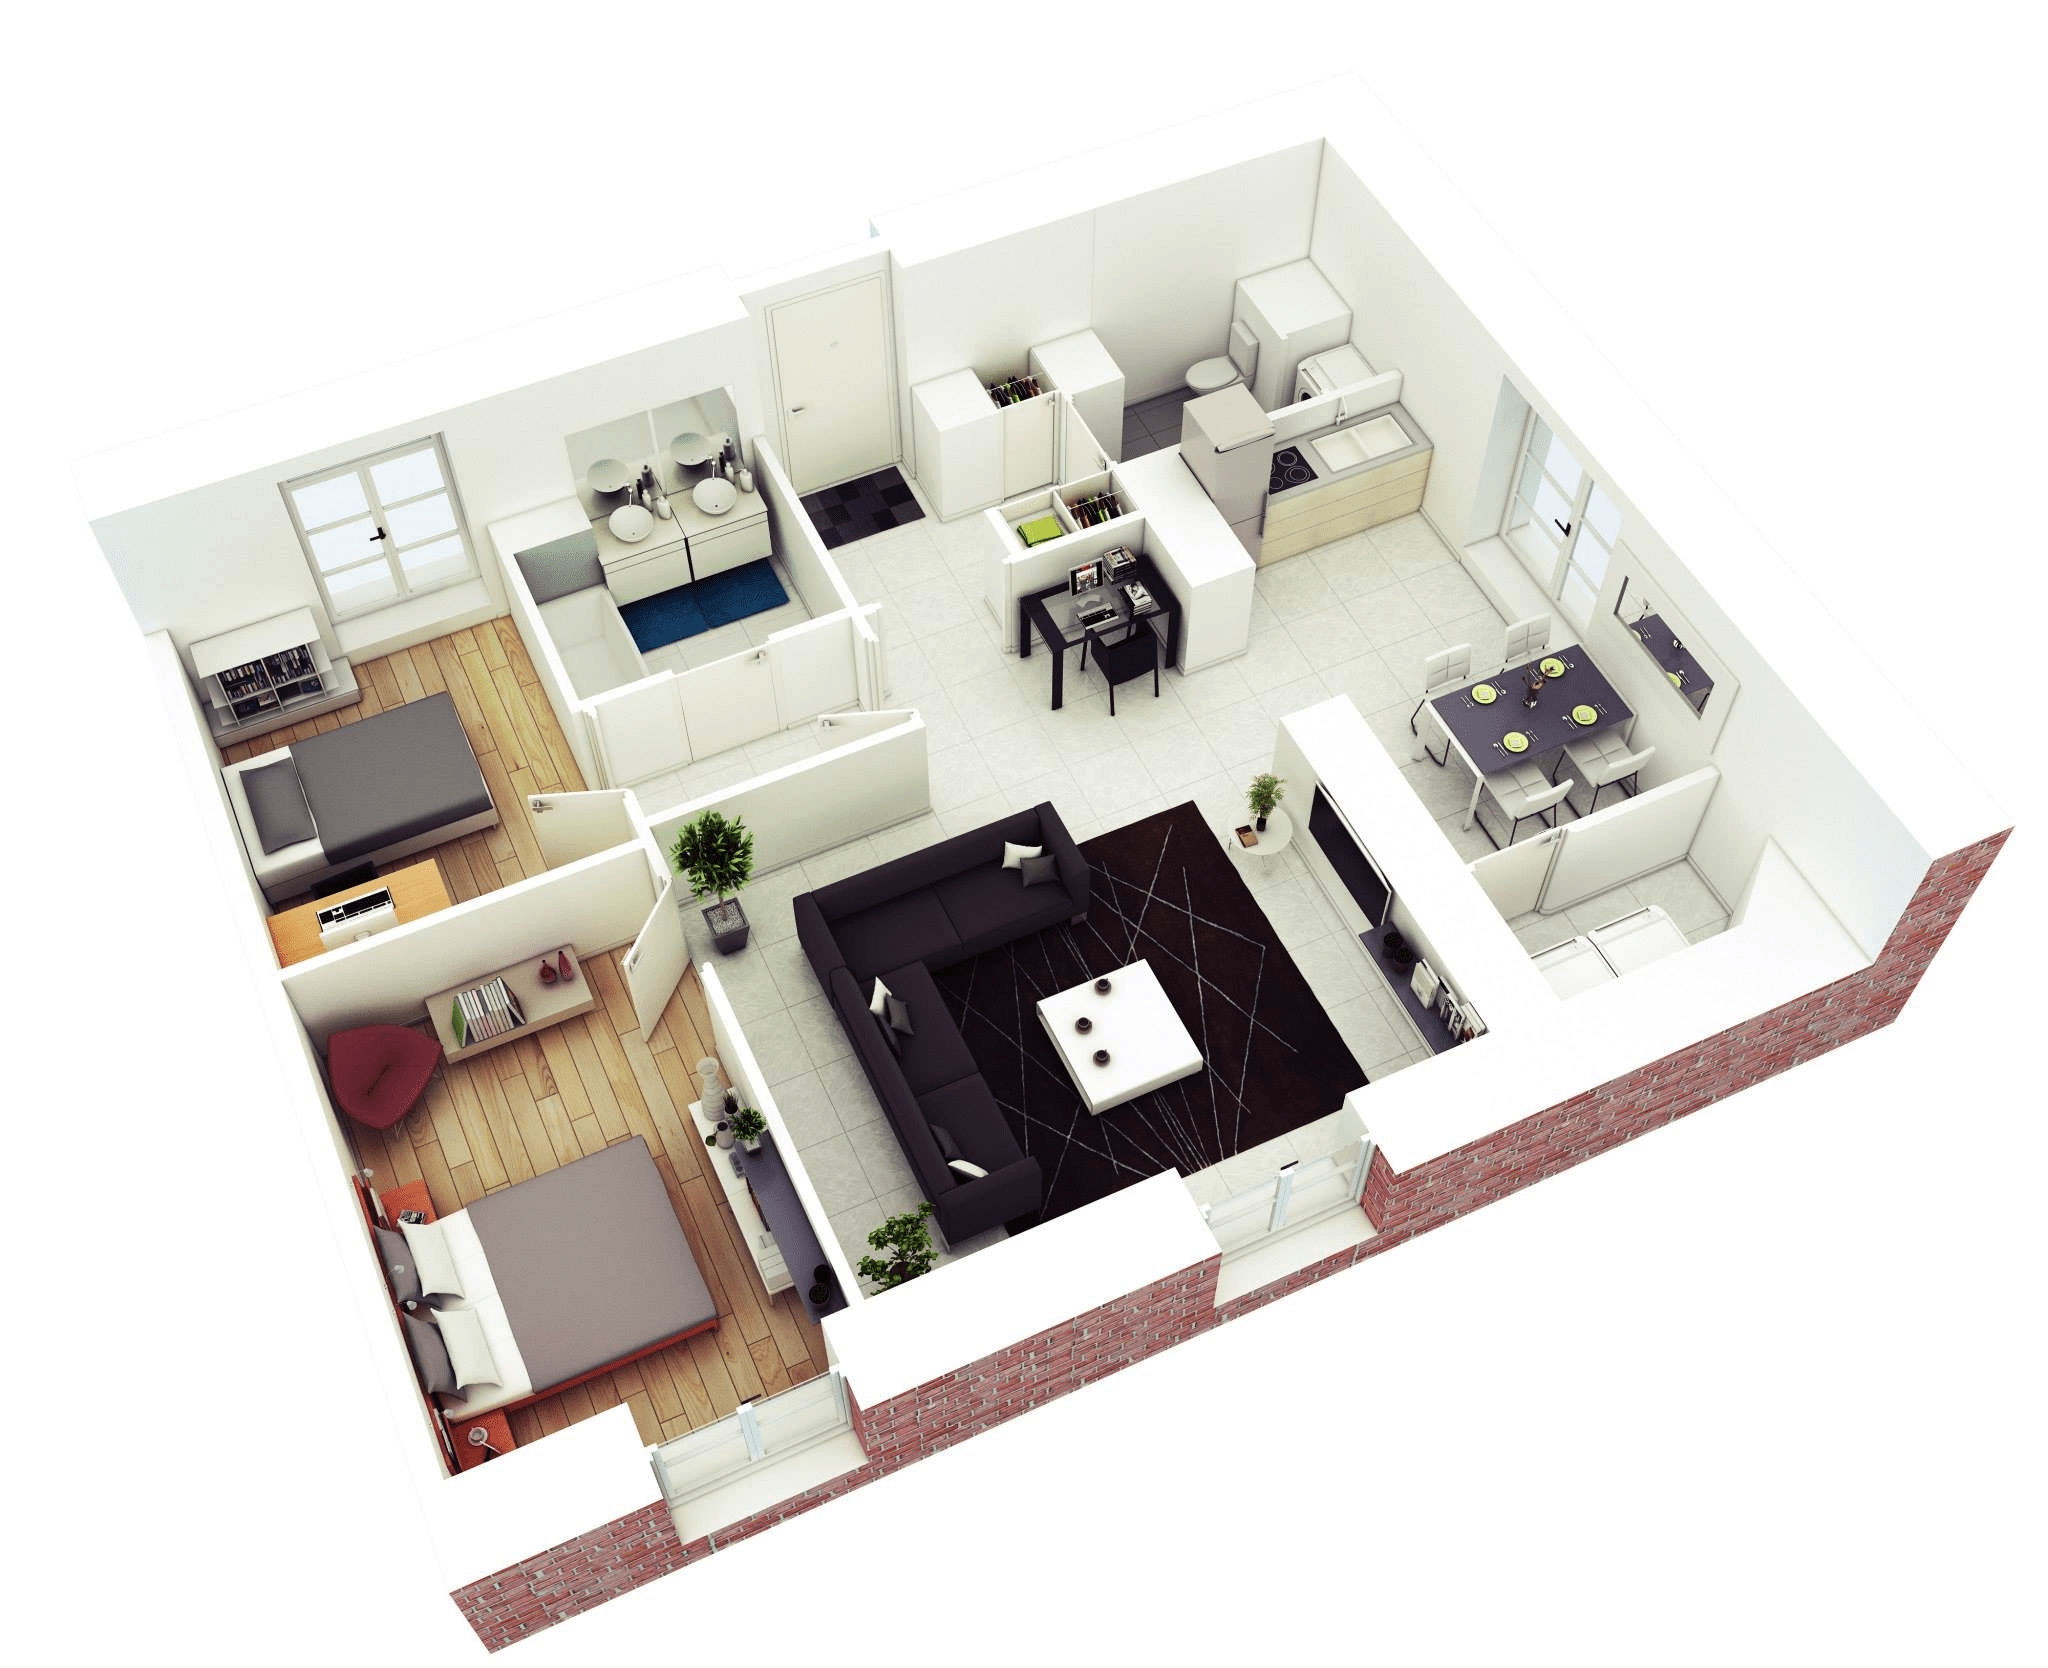 Marvelous 3d two bedroom house layout design plans #22449 | interior ideas intended for 2 bedroom 3d floor plan